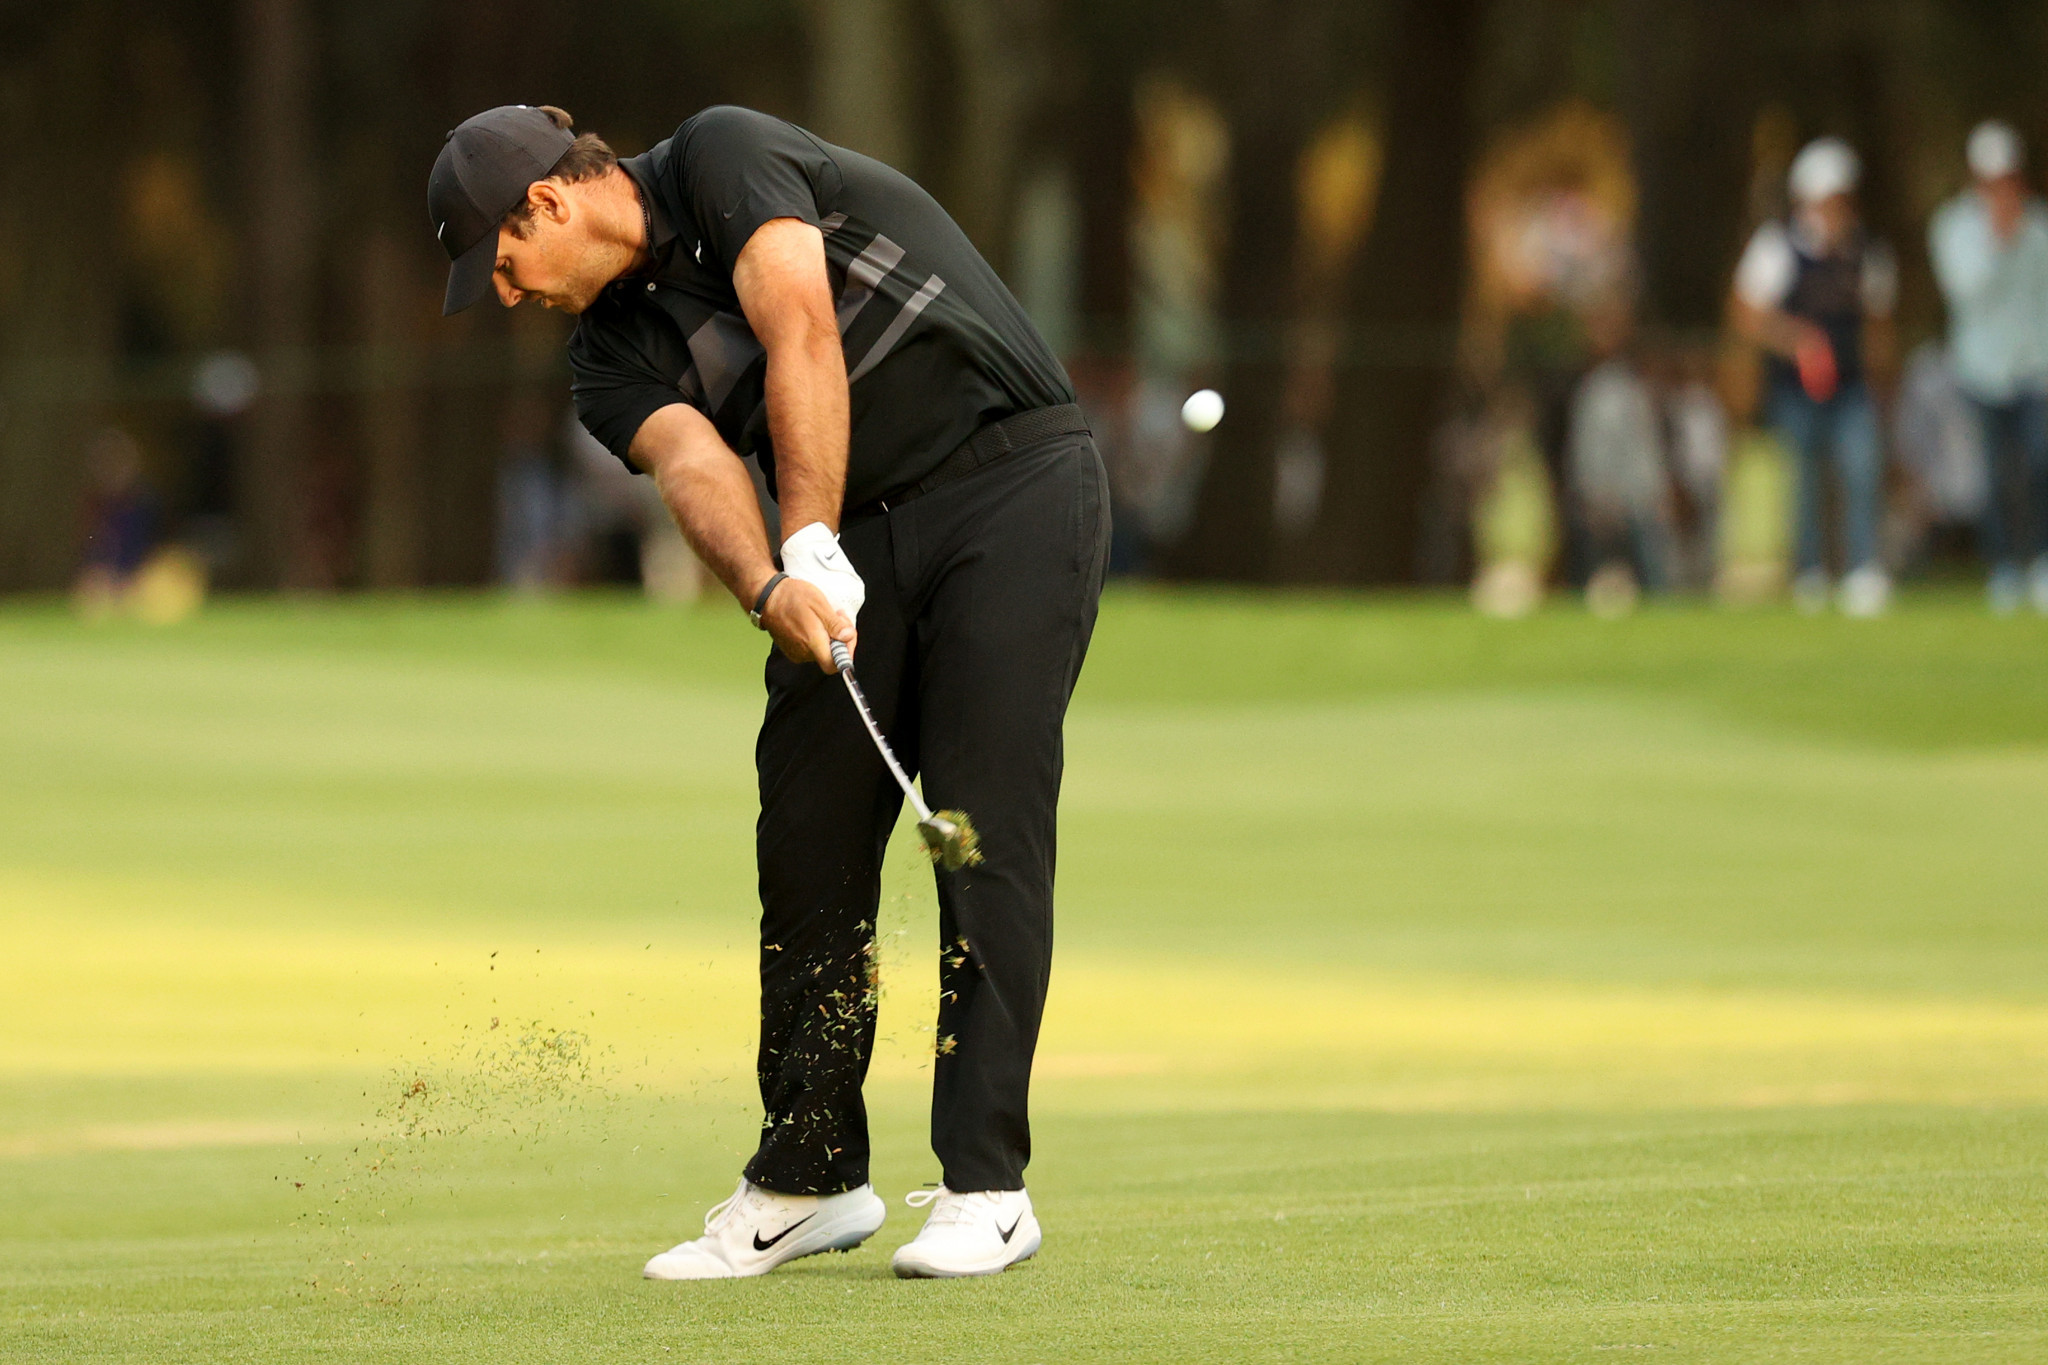 Patrick Reed ended 18-under-par for the tournament at Club de Golf Chapultepec ©Getty Images